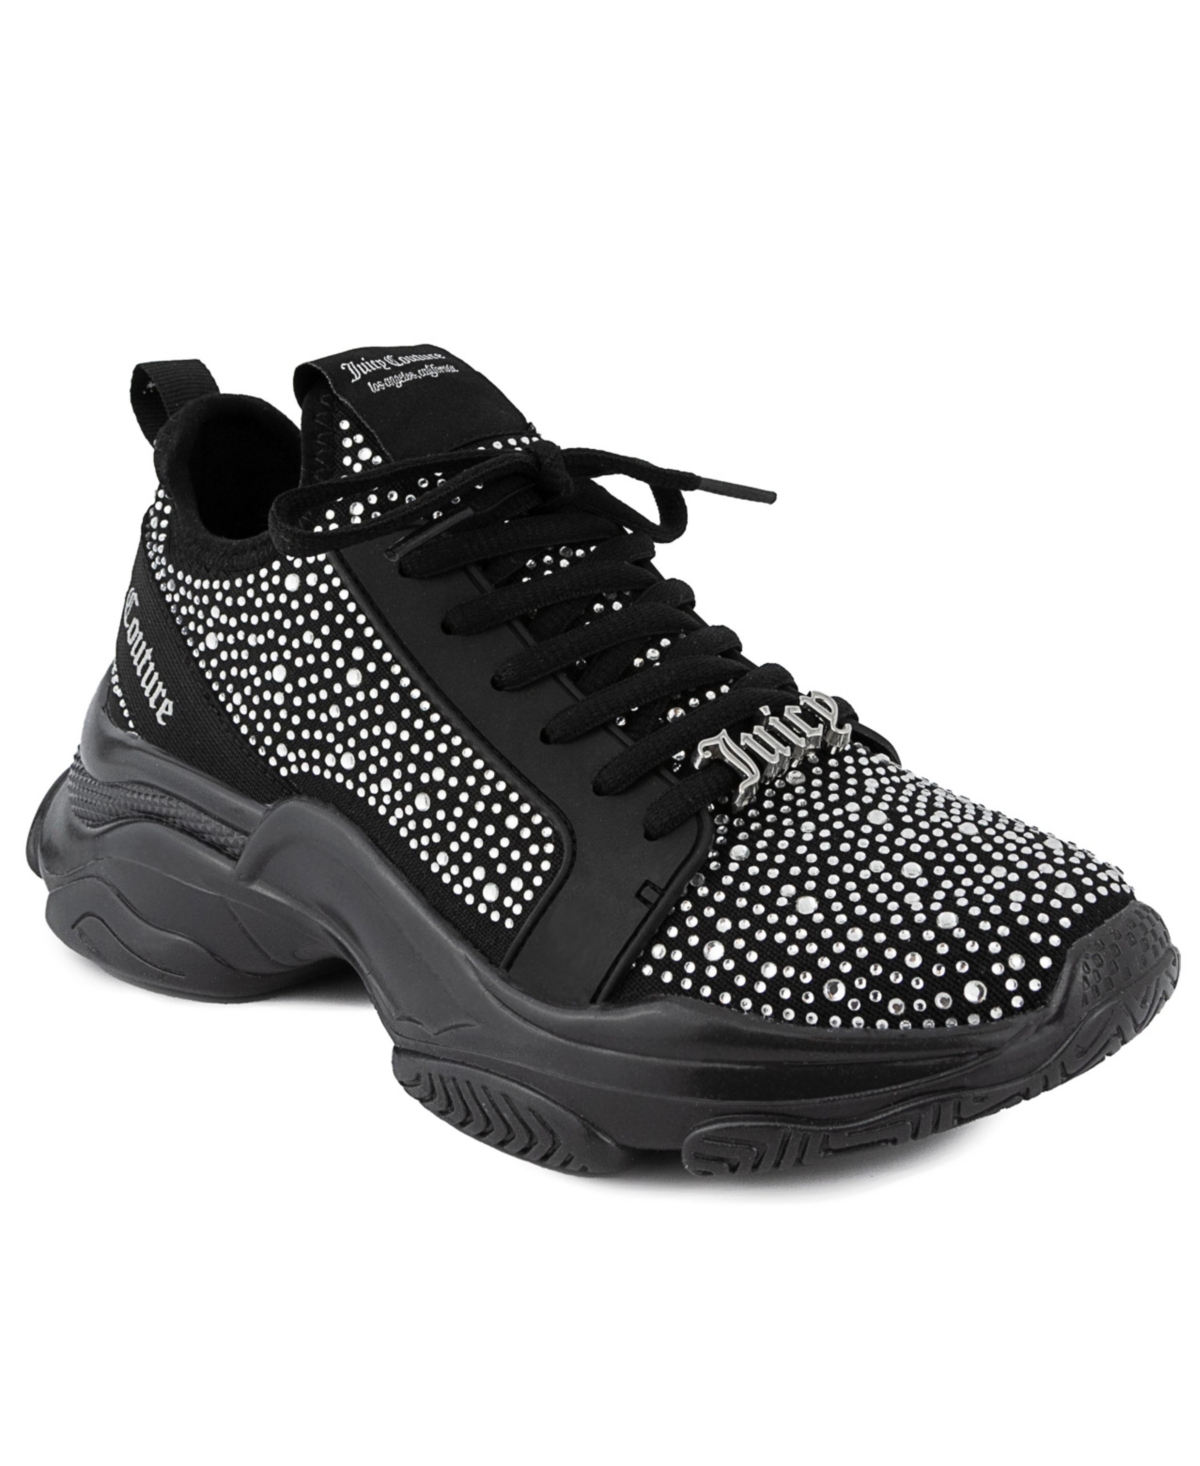 Juicy Couture Women's Adana Lace-up Sneakers In Black